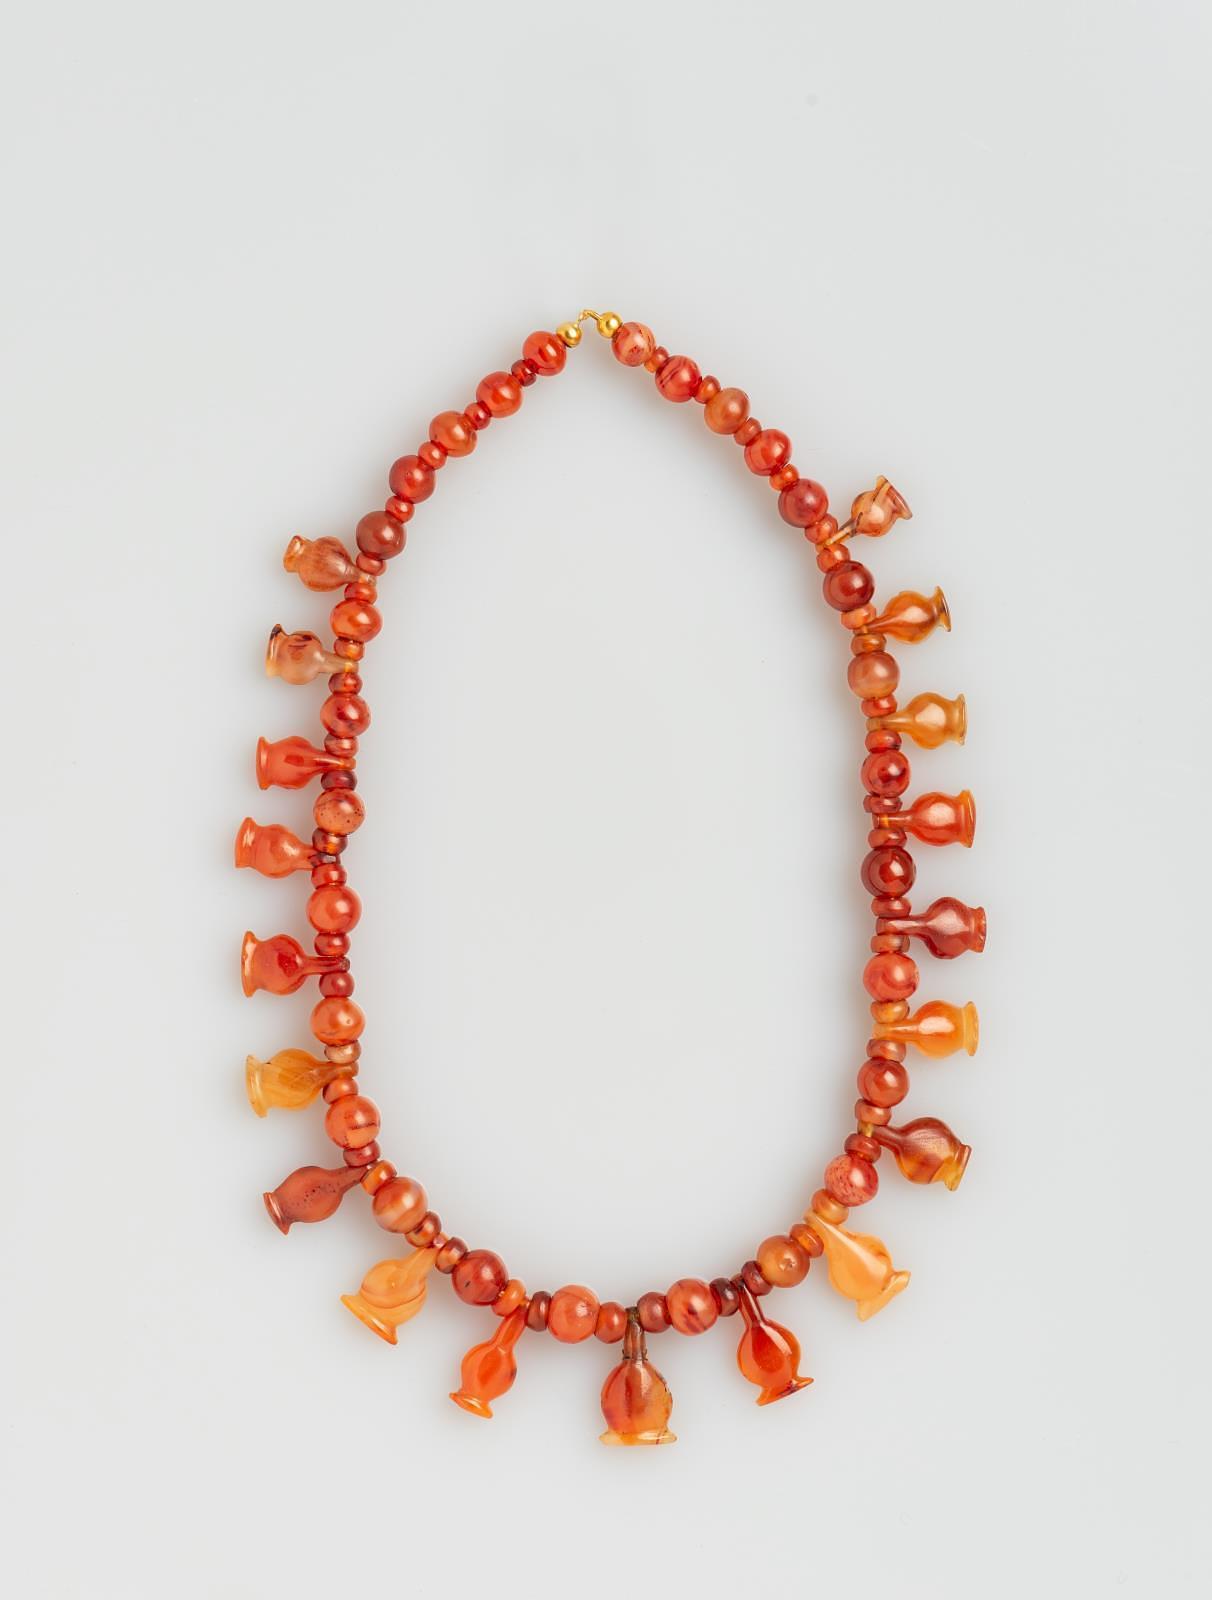 Egyptian carnelian necklace, 18th Dynasty, 1550-1295 BCE, from The Museum of Fine Arts, Boston.jpg